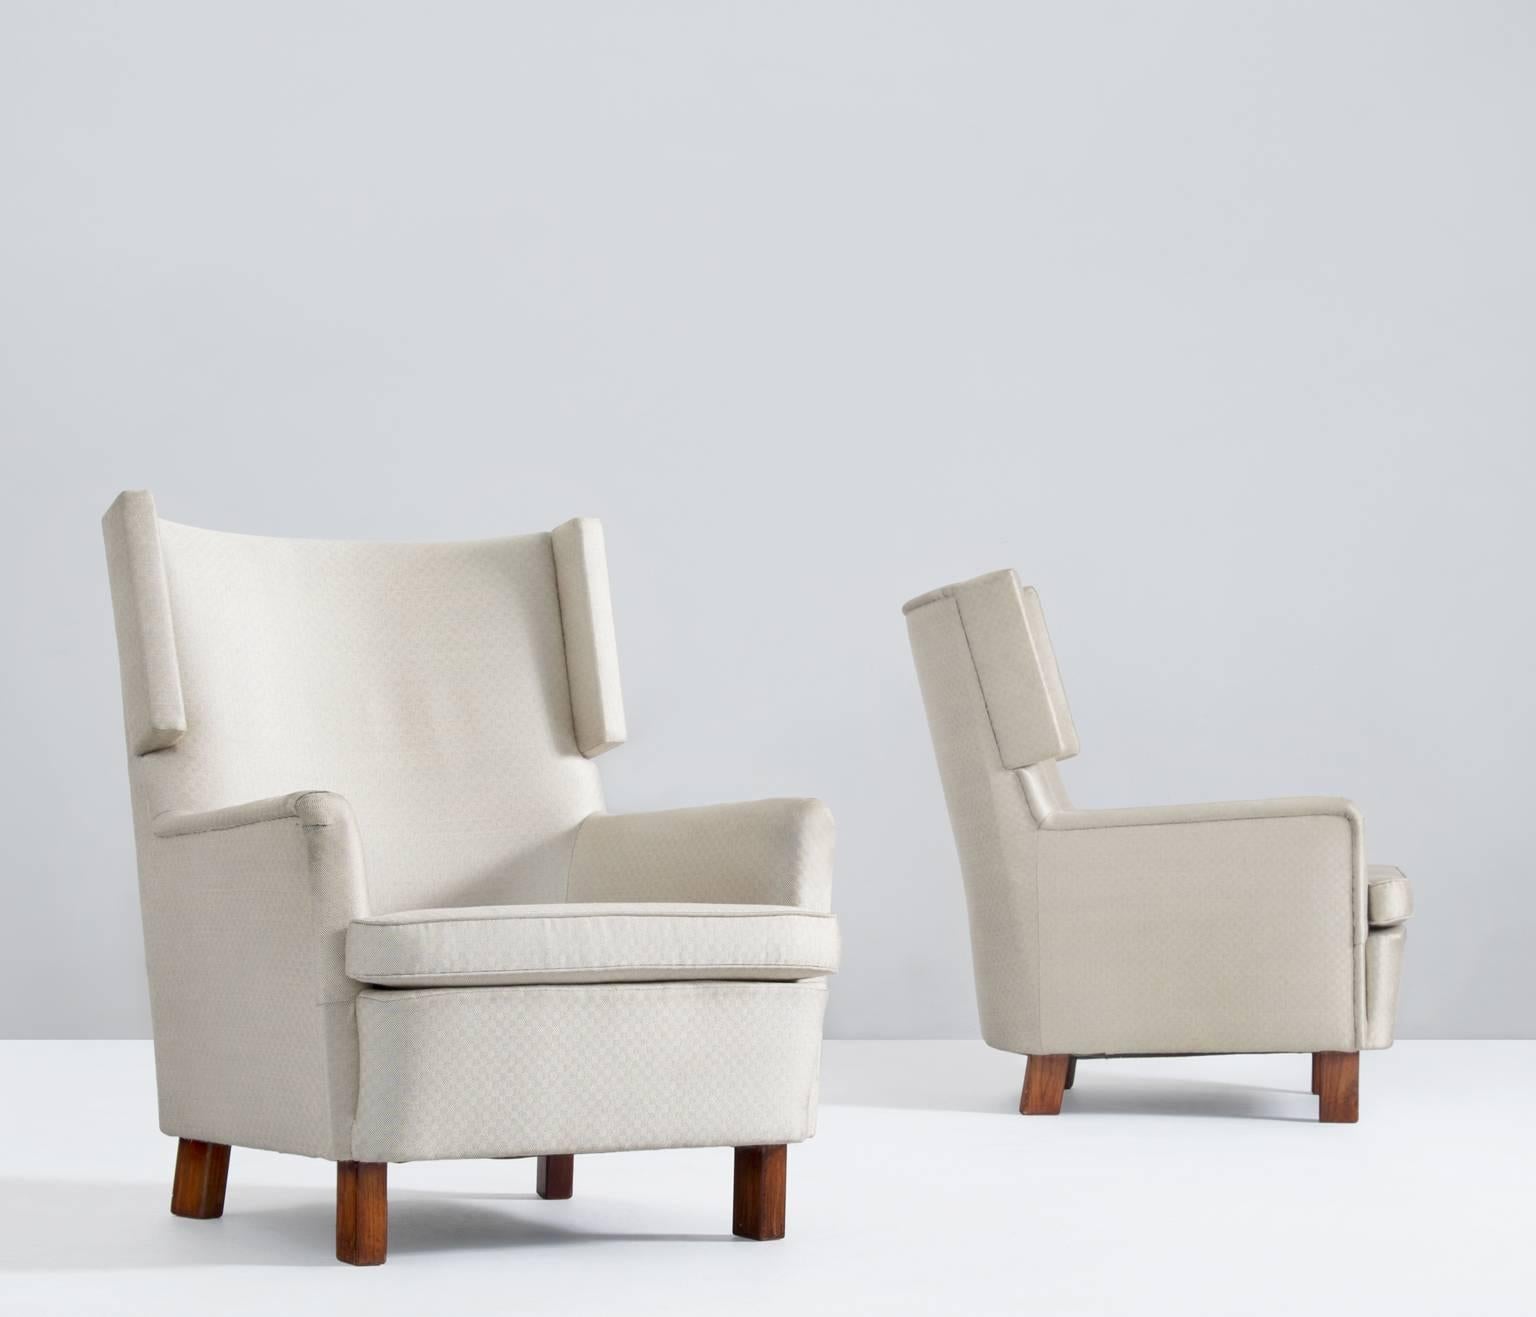 Very nice designed Swedish pair of Danish mid-century wingback chairs in off white upholstery. Very Interesting shapes with nice wingback detail.

Currently upholstered in original white detailed fabric we advise re-upholstery in order to fully